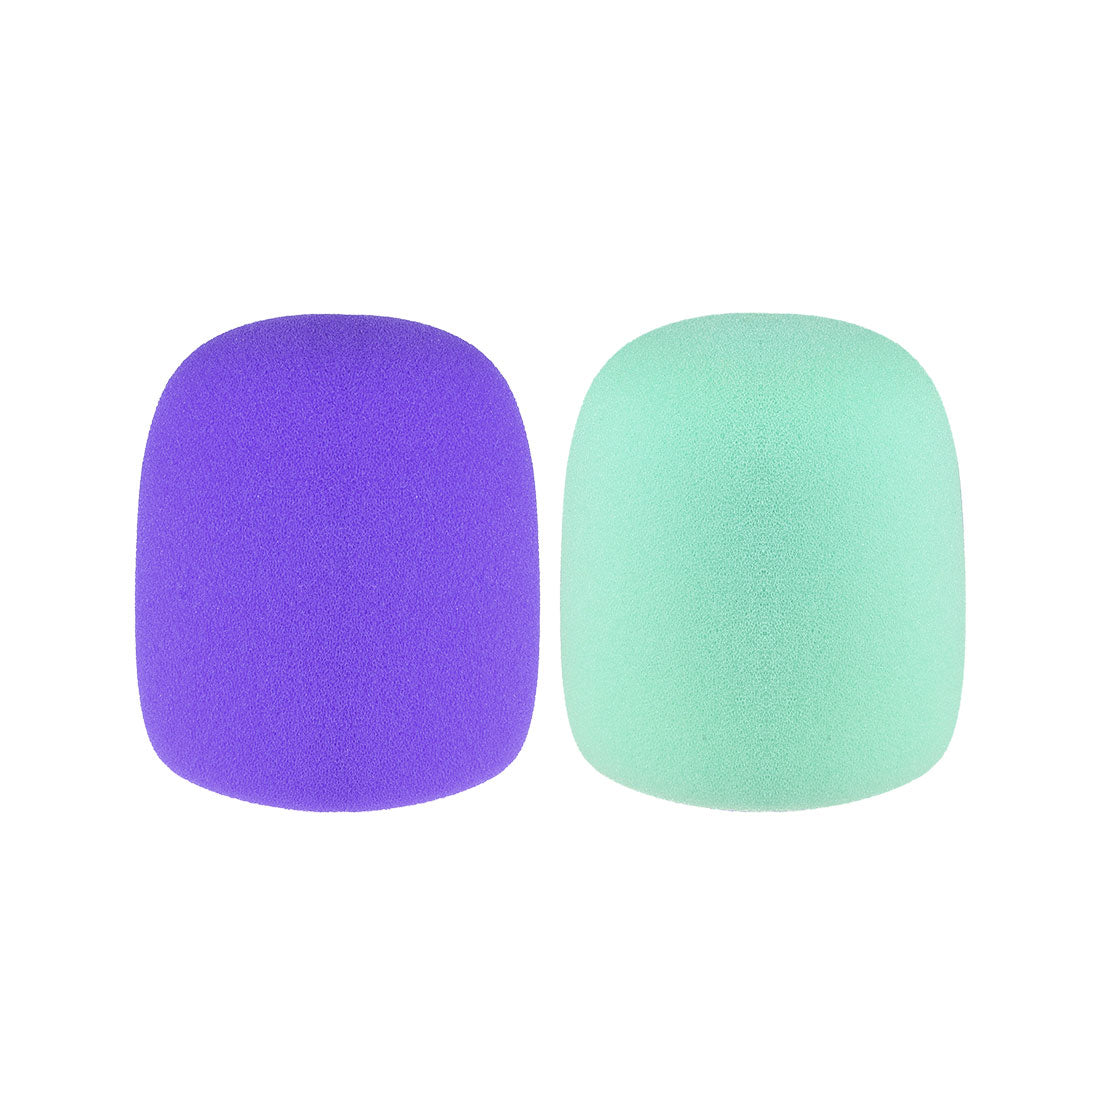 uxcell Uxcell 2PCS Thicken Sponge Foam Mic Cover Handheld Microphone Windscreen Purple Green for KTV